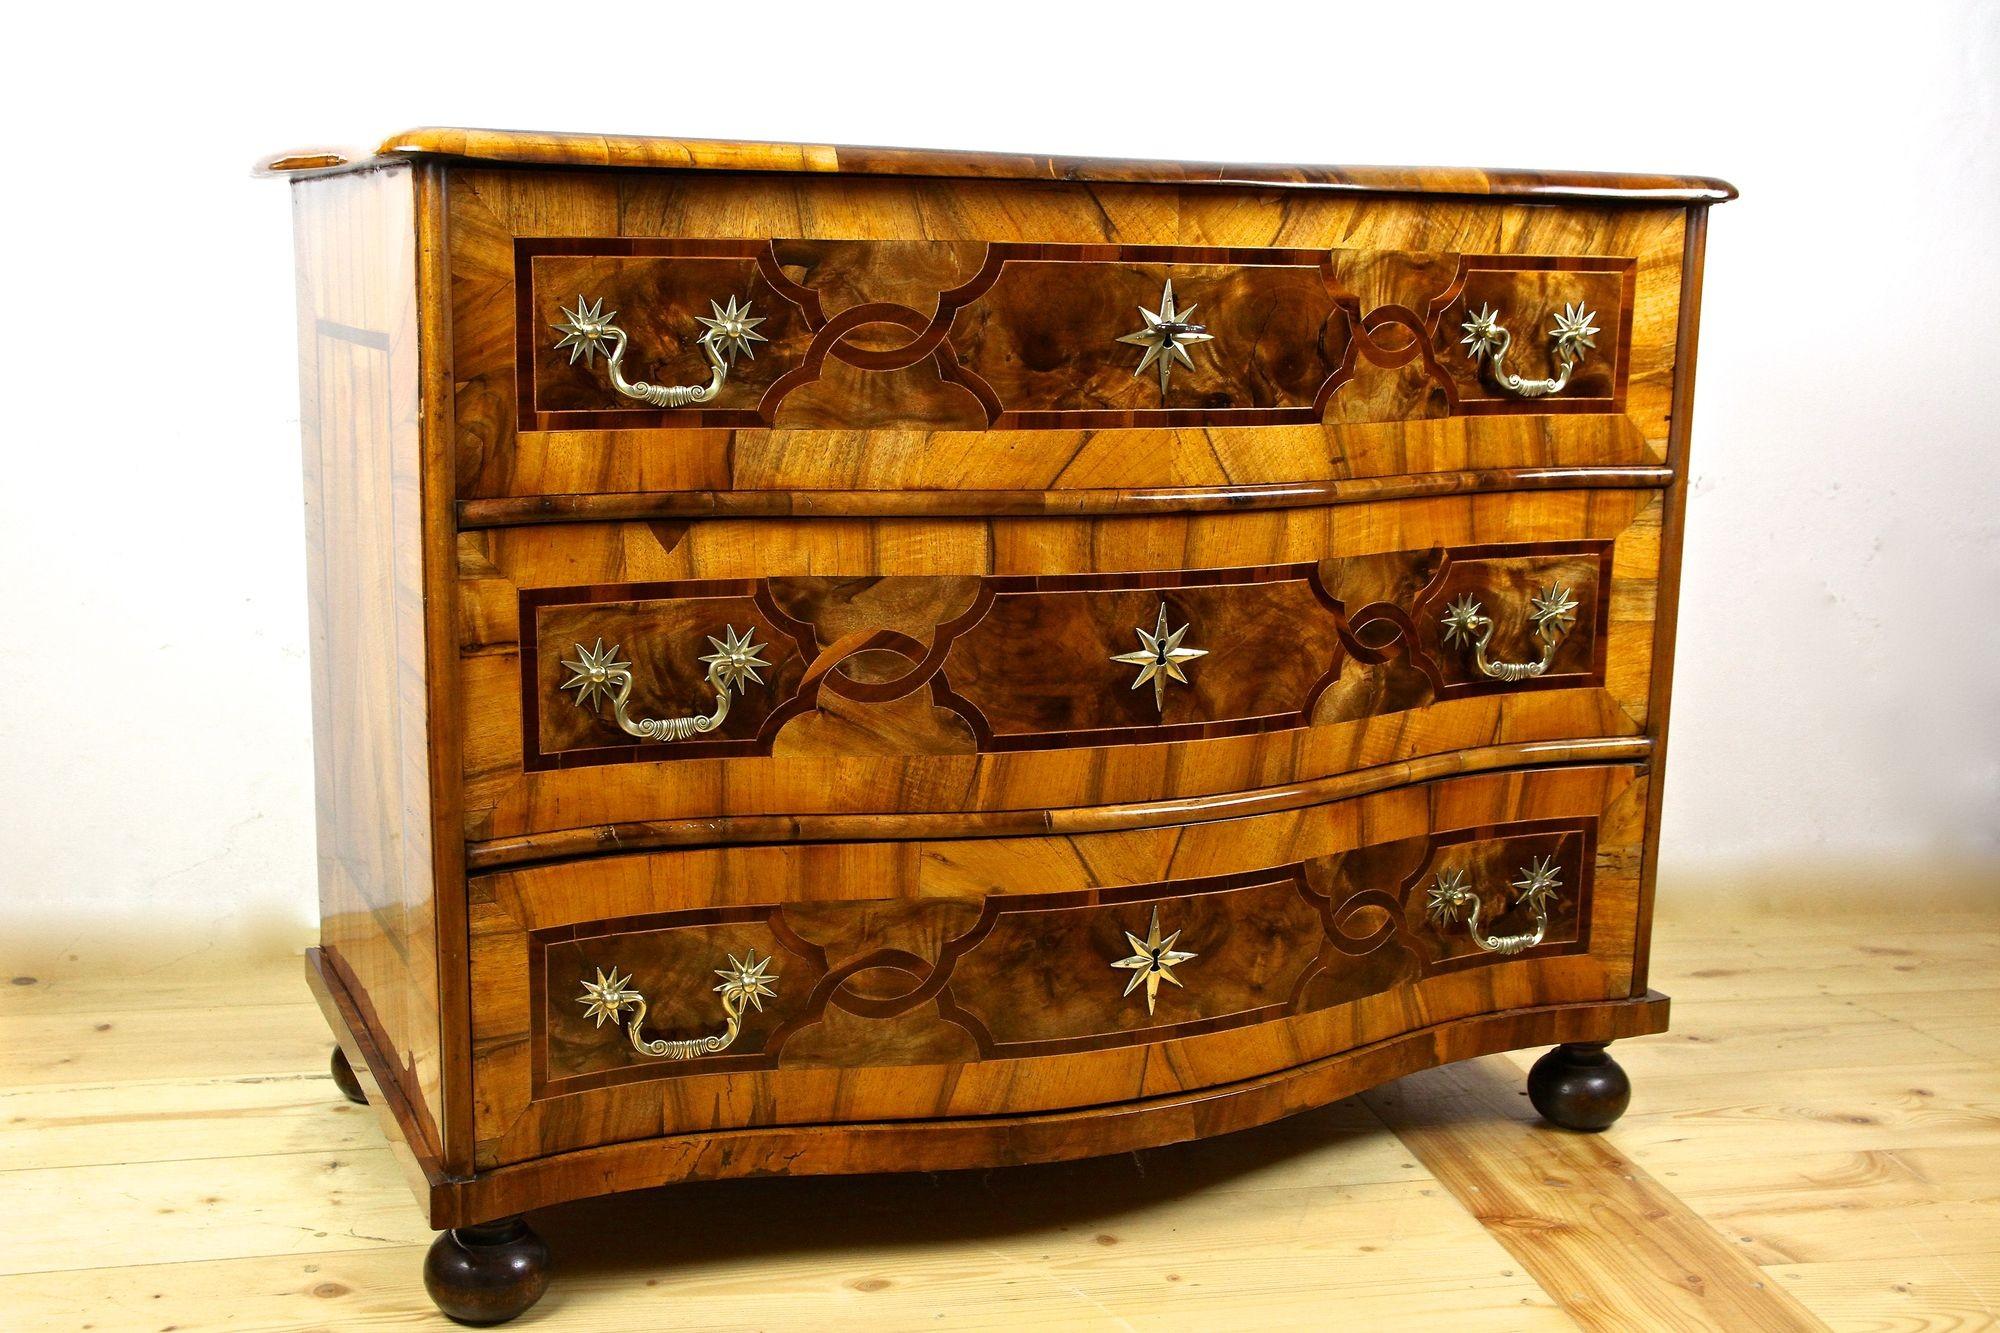 19th Century 18th Century Baroque Chest of Drawers with Marquetry Works, Germany circa 1760